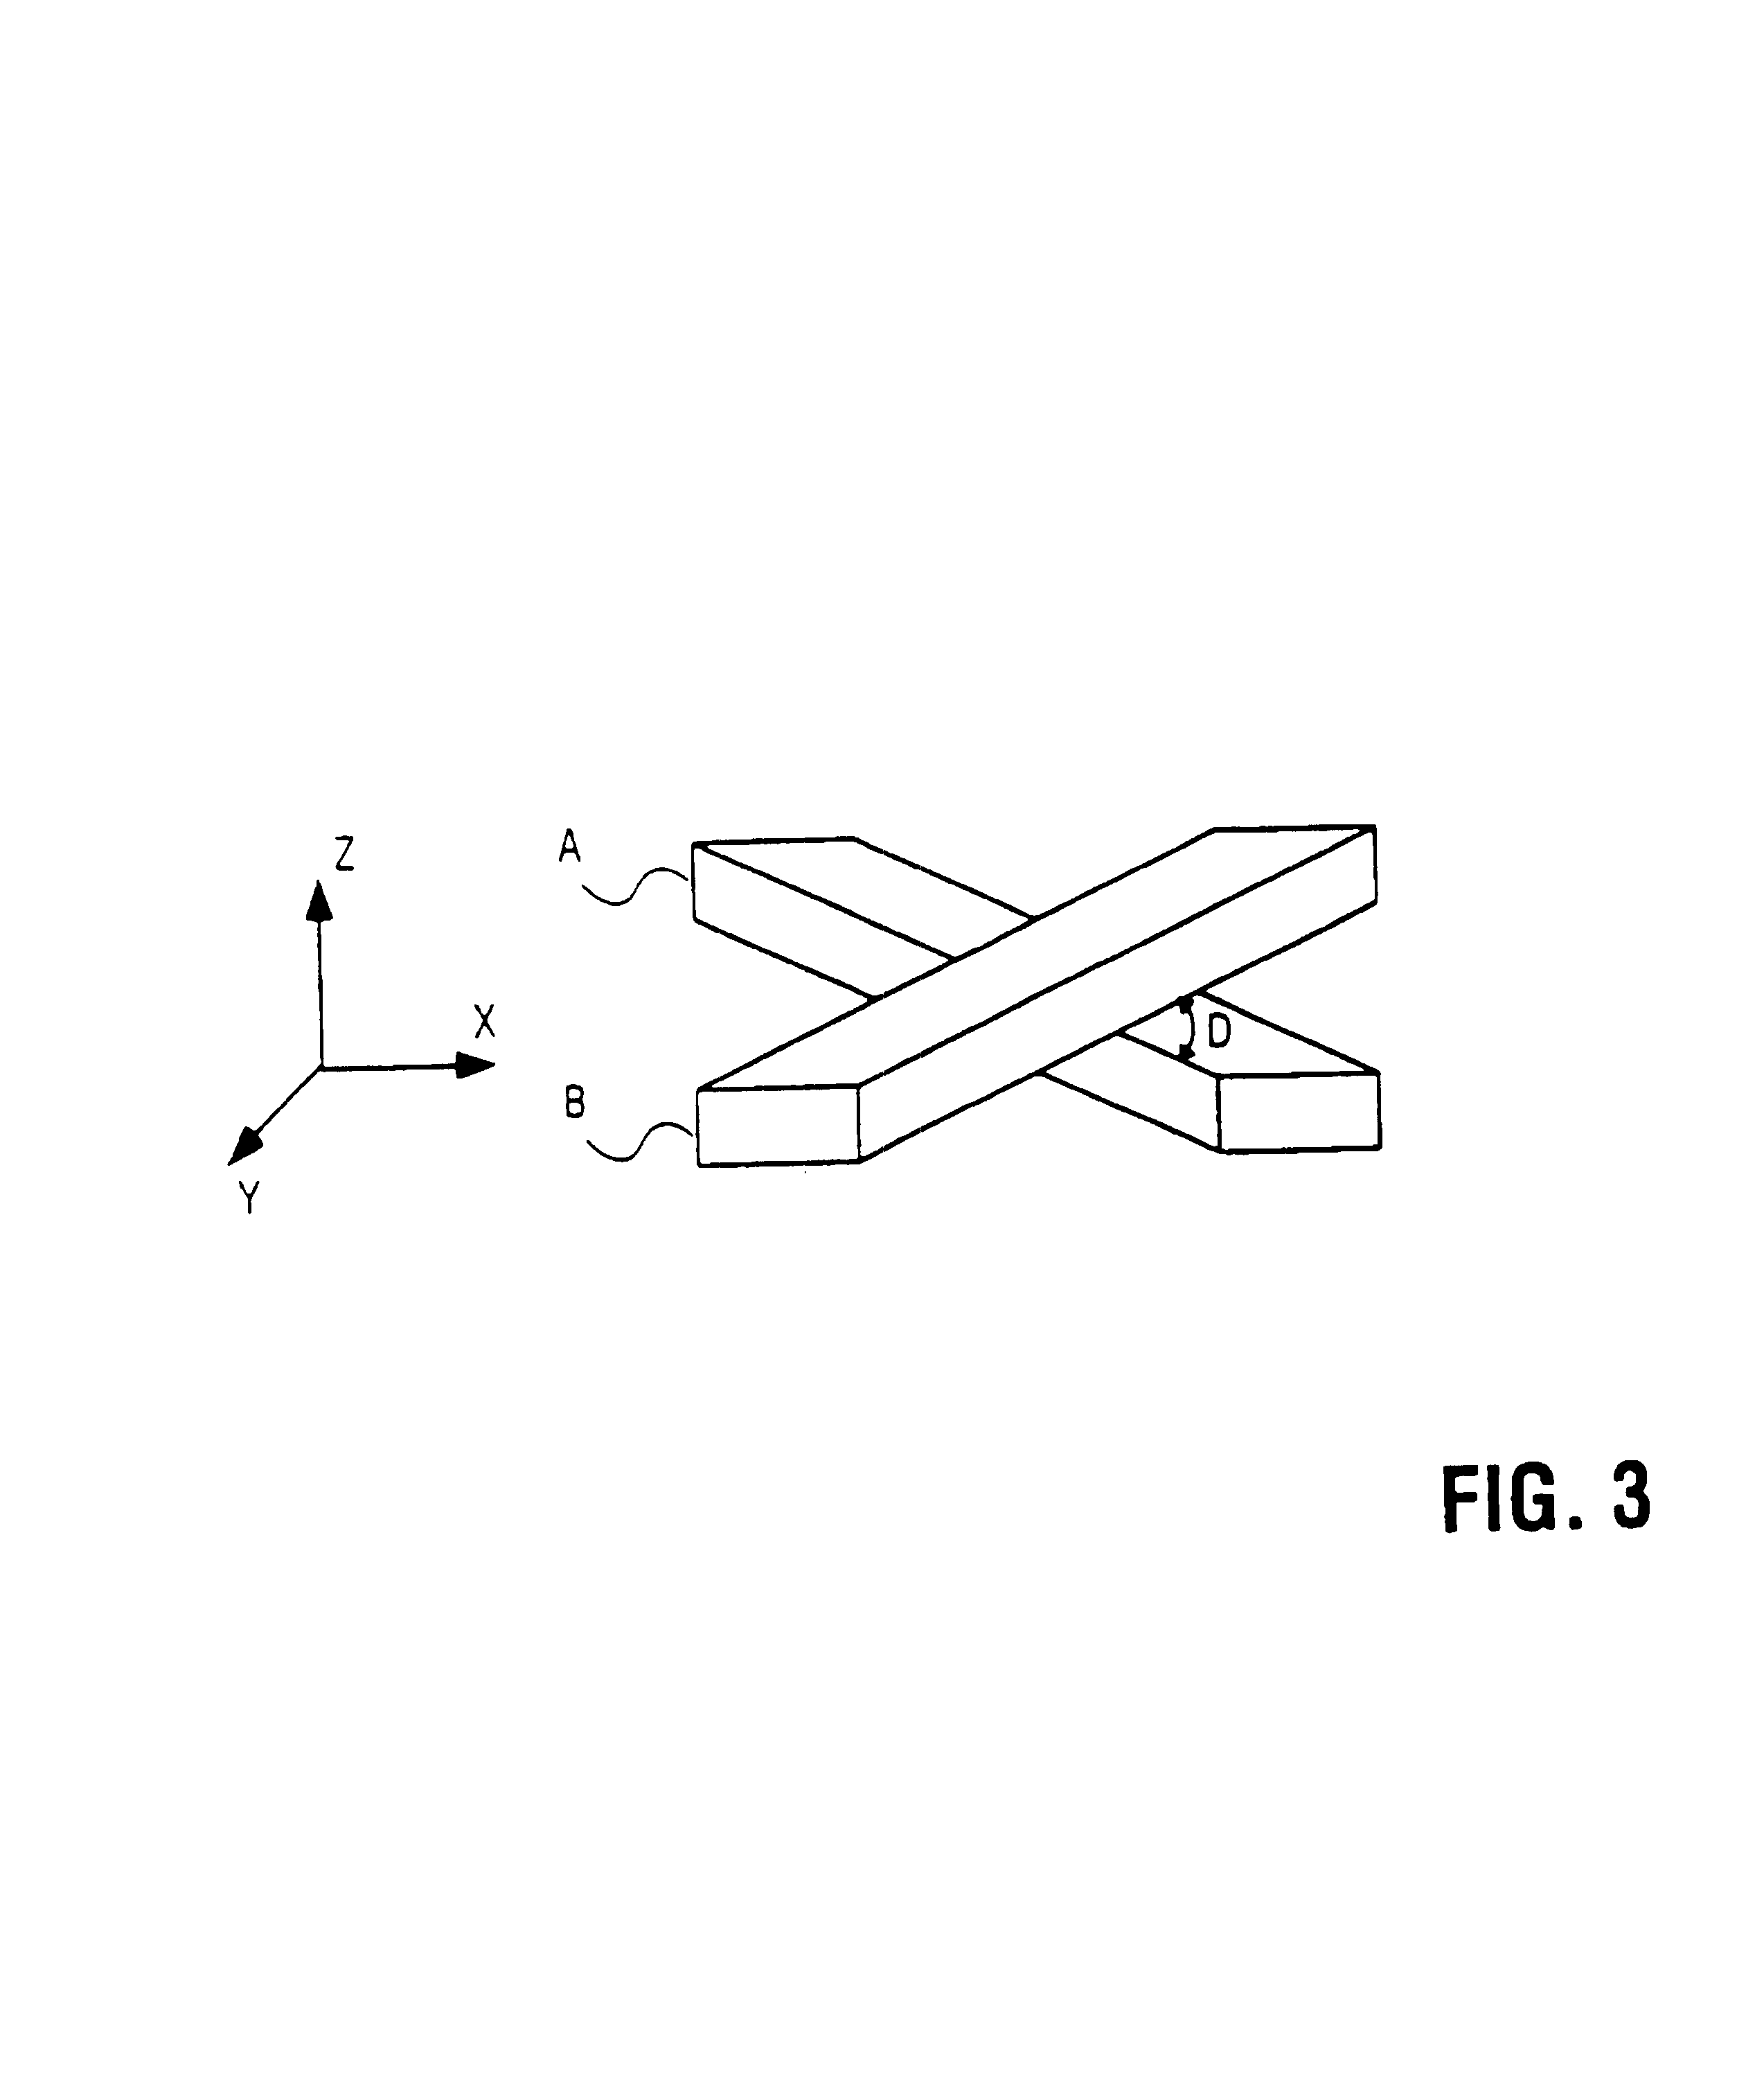 Electromagnetic coupler flexible circuit with a curved coupling portion